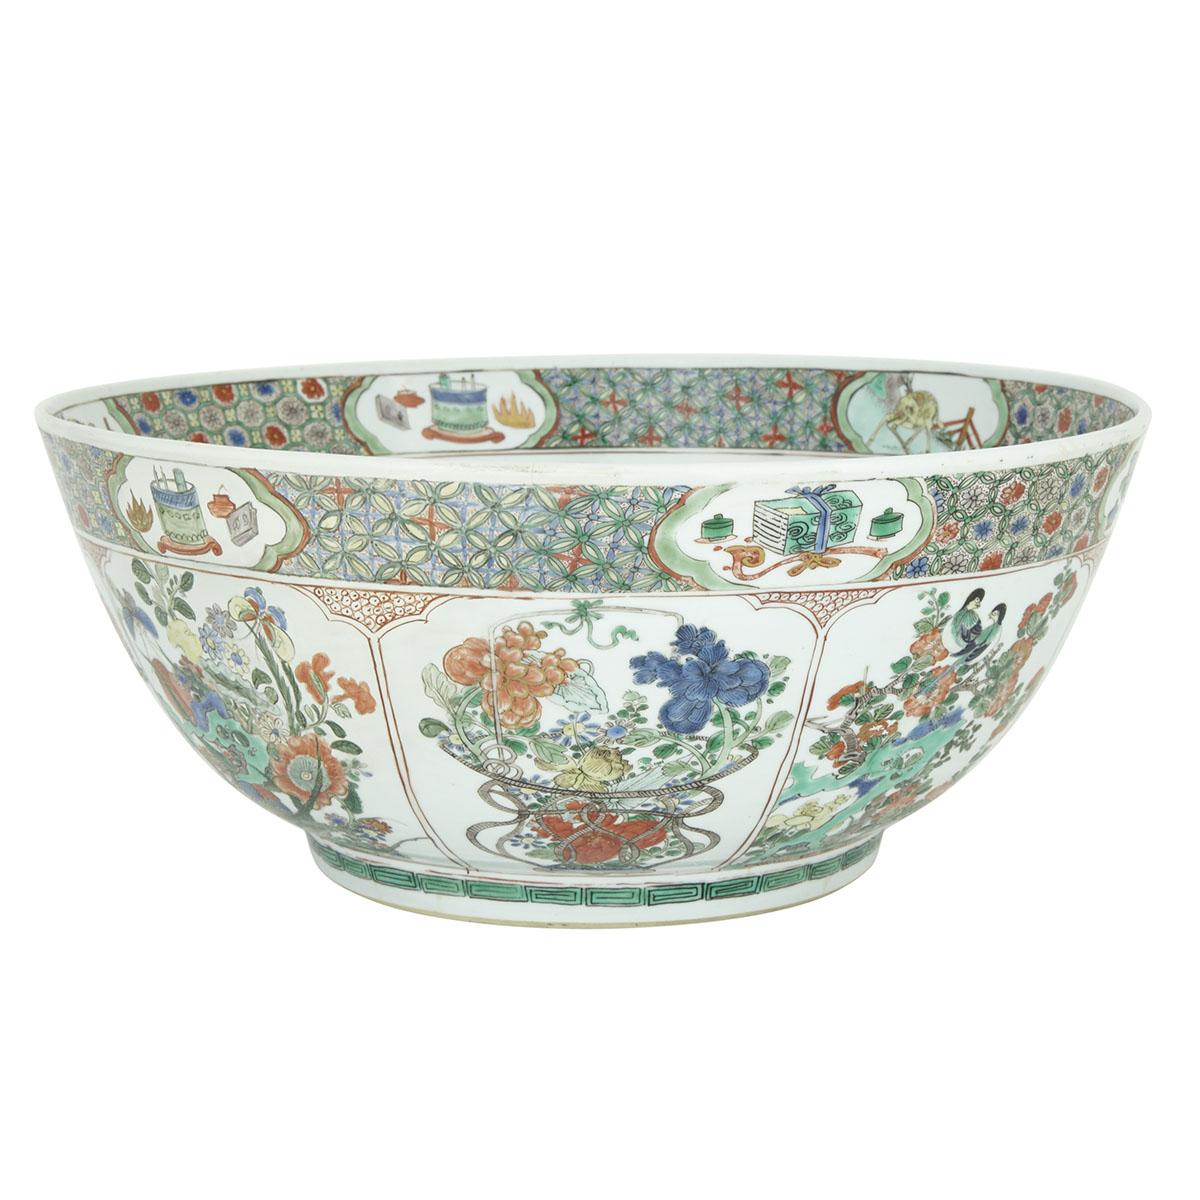 A MASSIVE FAMILLE-VERTE WUCAI PUNCH BOWL, MARK AND PERIOD OF KANGXI (1662-1772) 清康熙 五彩牡丹瑞果紋大碗 Finely